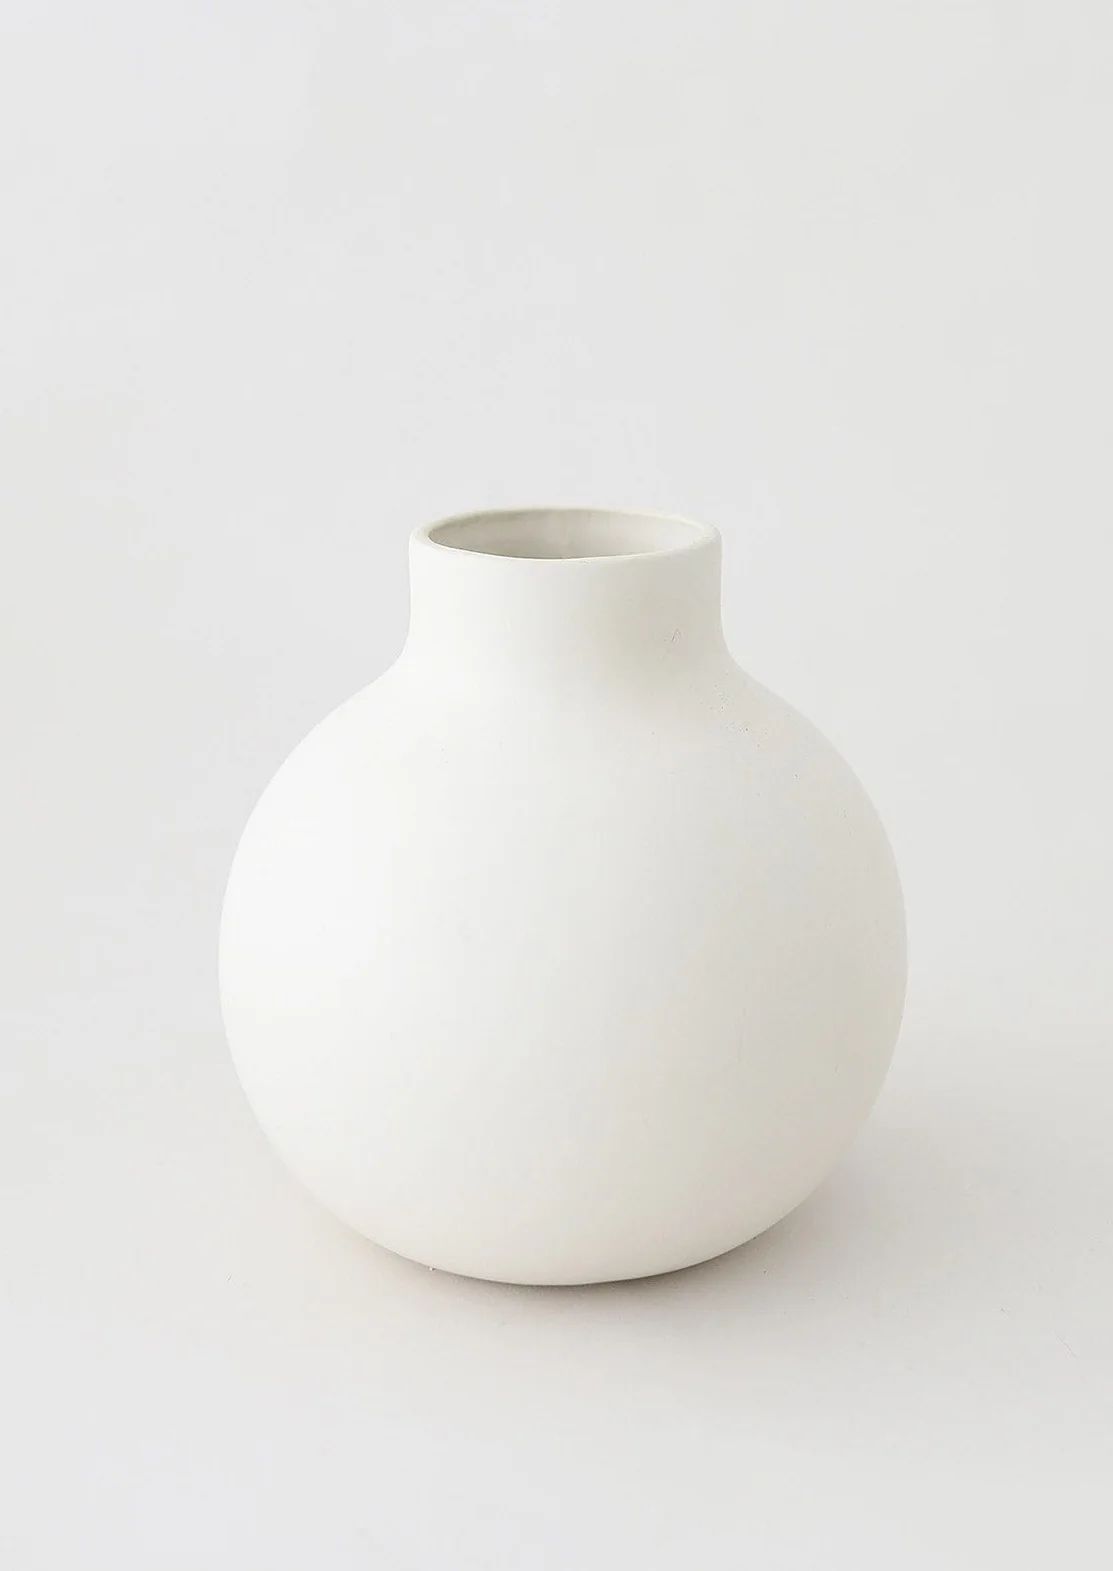 Afloral Creamy White Round Ceramic Vase - 8" Tall x 8" Wide | Afloral (US)